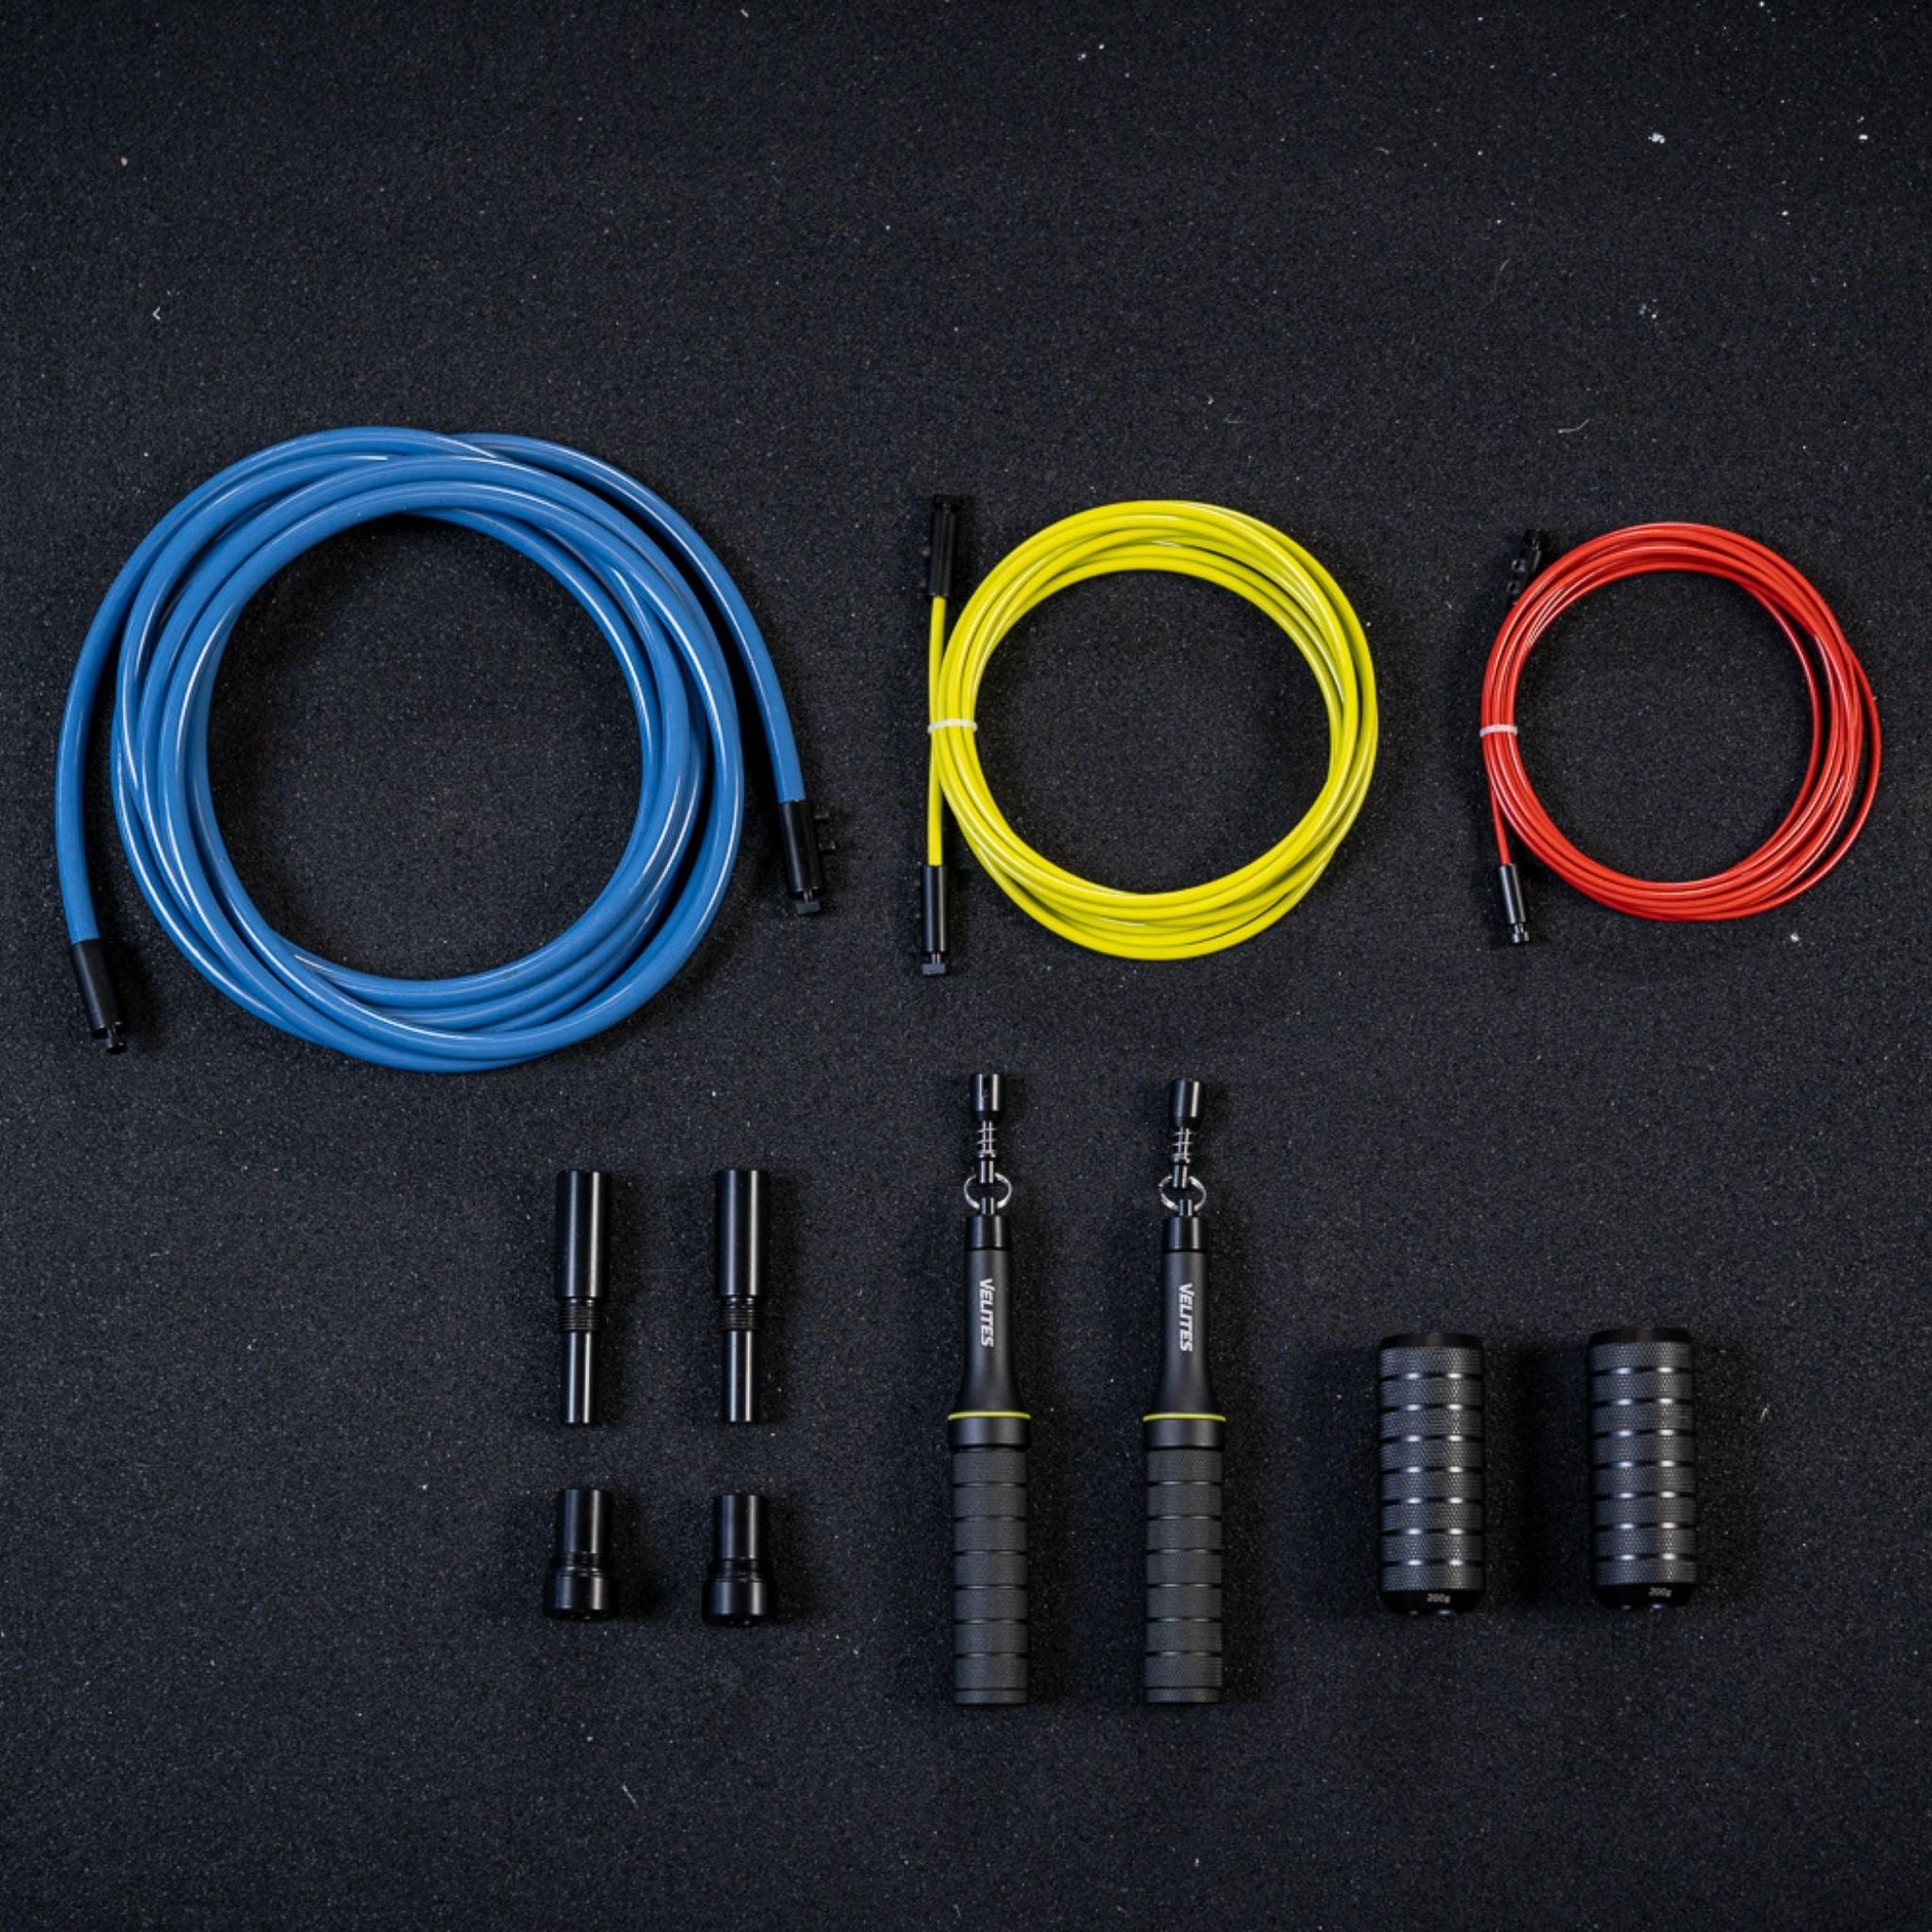 Jump Rope Earth 2.0 + Weights + Cables Pack